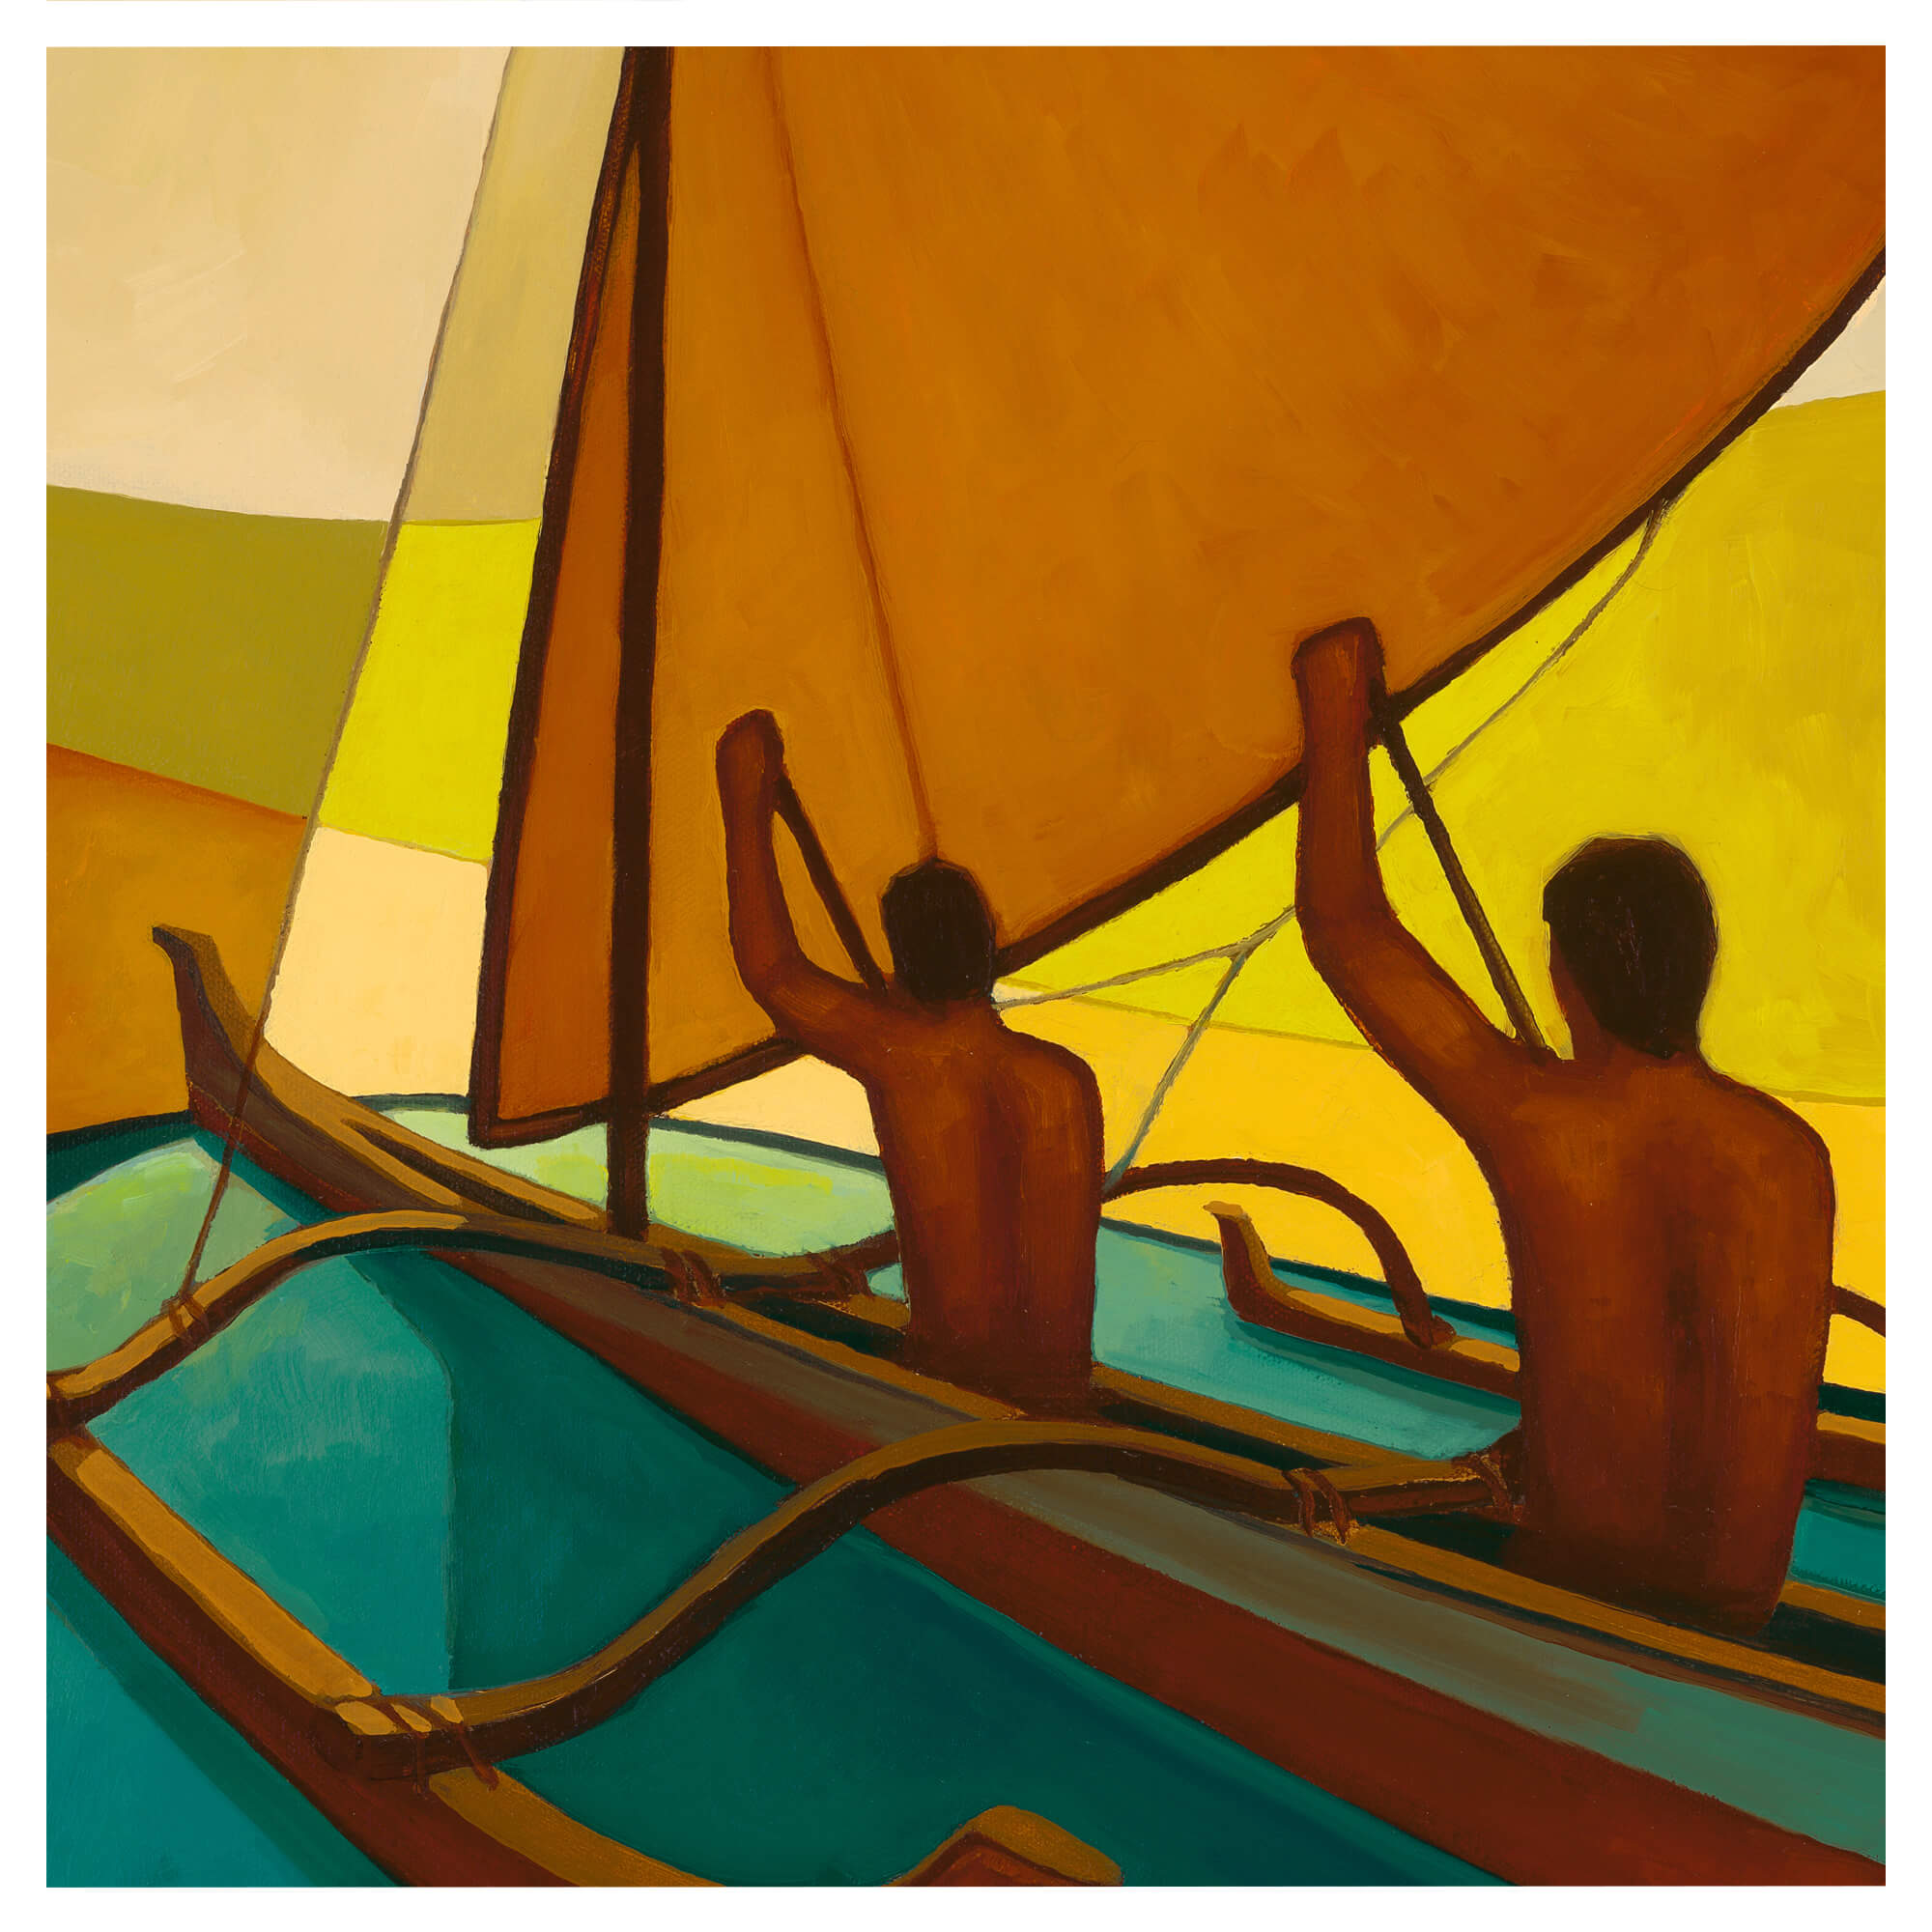 Two men in a canoe by Hawaii artist Colin Redican